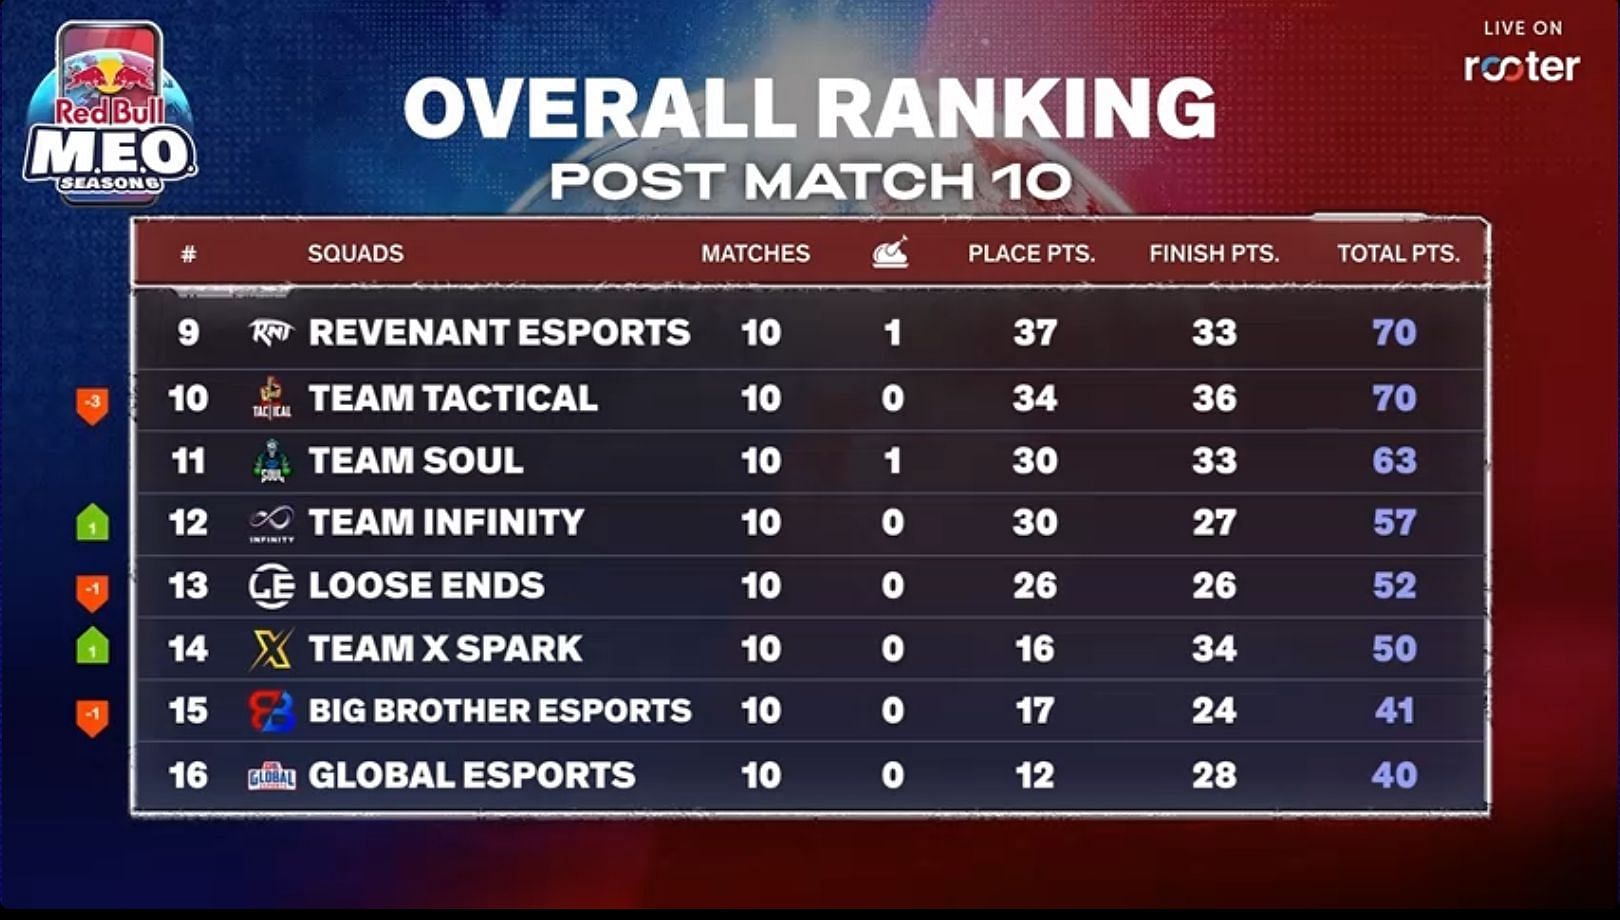 Team Soul dropped to 11th place (Image via Rooter)